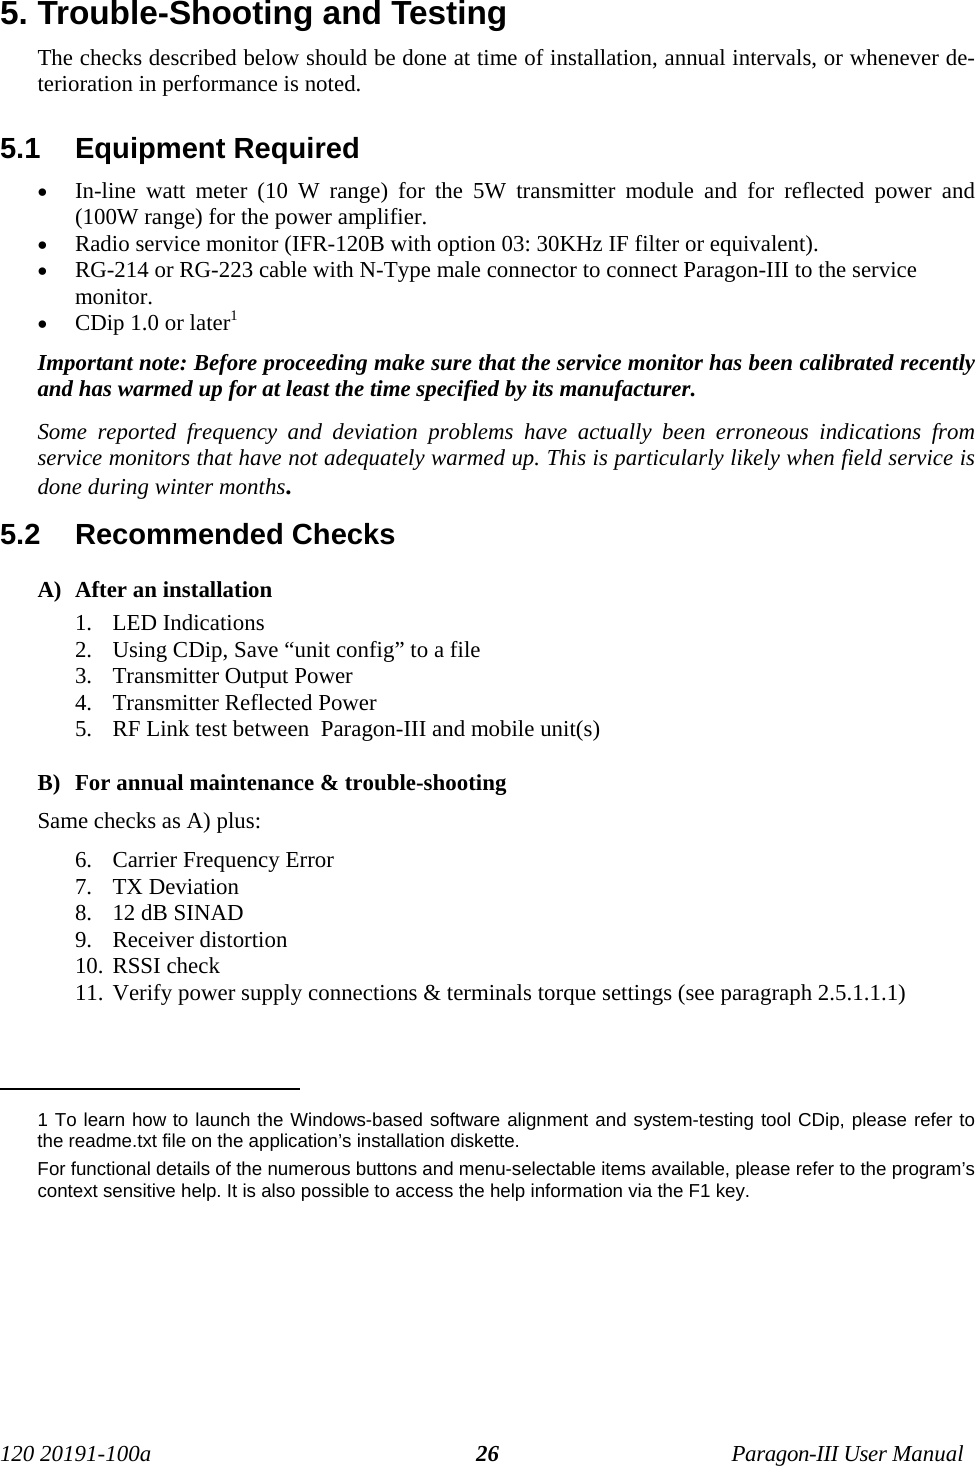 120 20191-100a Paragon-III User Manual265. Trouble-Shooting and Testing The checks described below should be done at time of installation, annual intervals, or whenever de-terioration in performance is noted.5.1  Equipment Required• In-line watt meter (10 W range) for the 5W transmitter module and for reflected power and(100W range) for the power amplifier.• Radio service monitor (IFR-120B with option 03: 30KHz IF filter or equivalent).• RG-214 or RG-223 cable with N-Type male connector to connect Paragon-III to the servicemonitor.• CDip 1.0 or later1Important note: Before proceeding make sure that the service monitor has been calibrated recentlyand has warmed up for at least the time specified by its manufacturer. Some reported frequency and deviation problems have actually been erroneous indications fromservice monitors that have not adequately warmed up. This is particularly likely when field service isdone during winter months.5.2  Recommended Checks  A) After an installation1. LED Indications2. Using CDip, Save “unit config” to a file3. Transmitter Output Power4. Transmitter Reflected Power5. RF Link test between  Paragon-III and mobile unit(s)B) For annual maintenance &amp; trouble-shootingSame checks as A) plus:6. Carrier Frequency Error7. TX Deviation8. 12 dB SINAD9. Receiver distortion10. RSSI check11. Verify power supply connections &amp; terminals torque settings (see paragraph 2.5.1.1.1)                                           1 To learn how to launch the Windows-based software alignment and system-testing tool CDip, please refer tothe readme.txt file on the application’s installation diskette.For functional details of the numerous buttons and menu-selectable items available, please refer to the program’scontext sensitive help. It is also possible to access the help information via the F1 key.